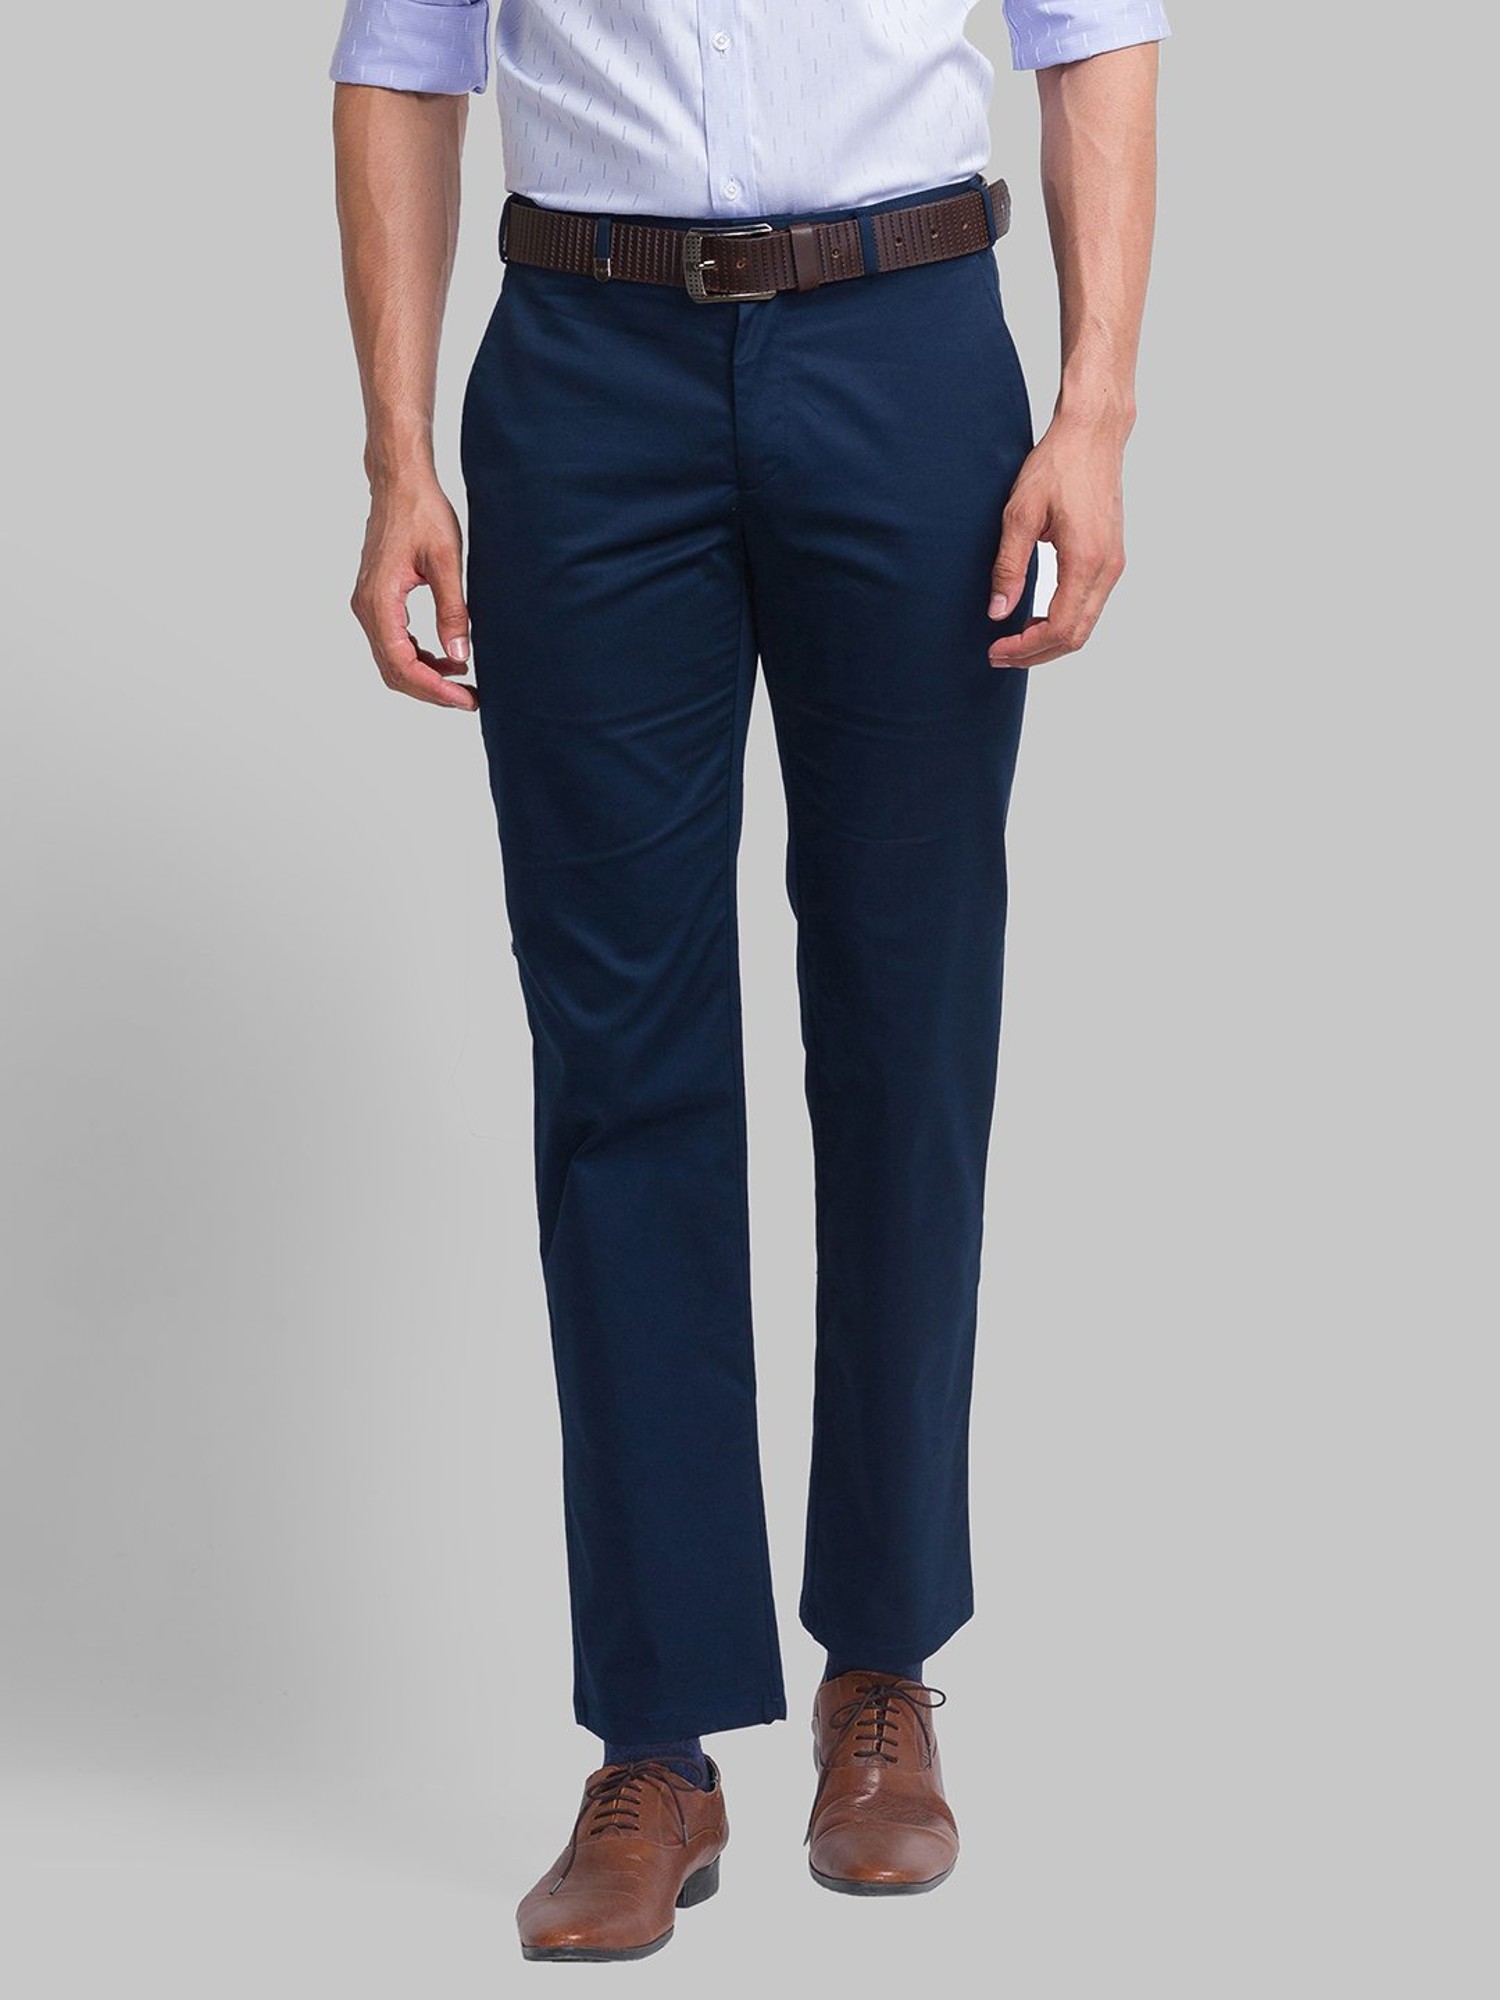 Buy Louis Philippe Grey Trousers Online  779800  Louis Philippe